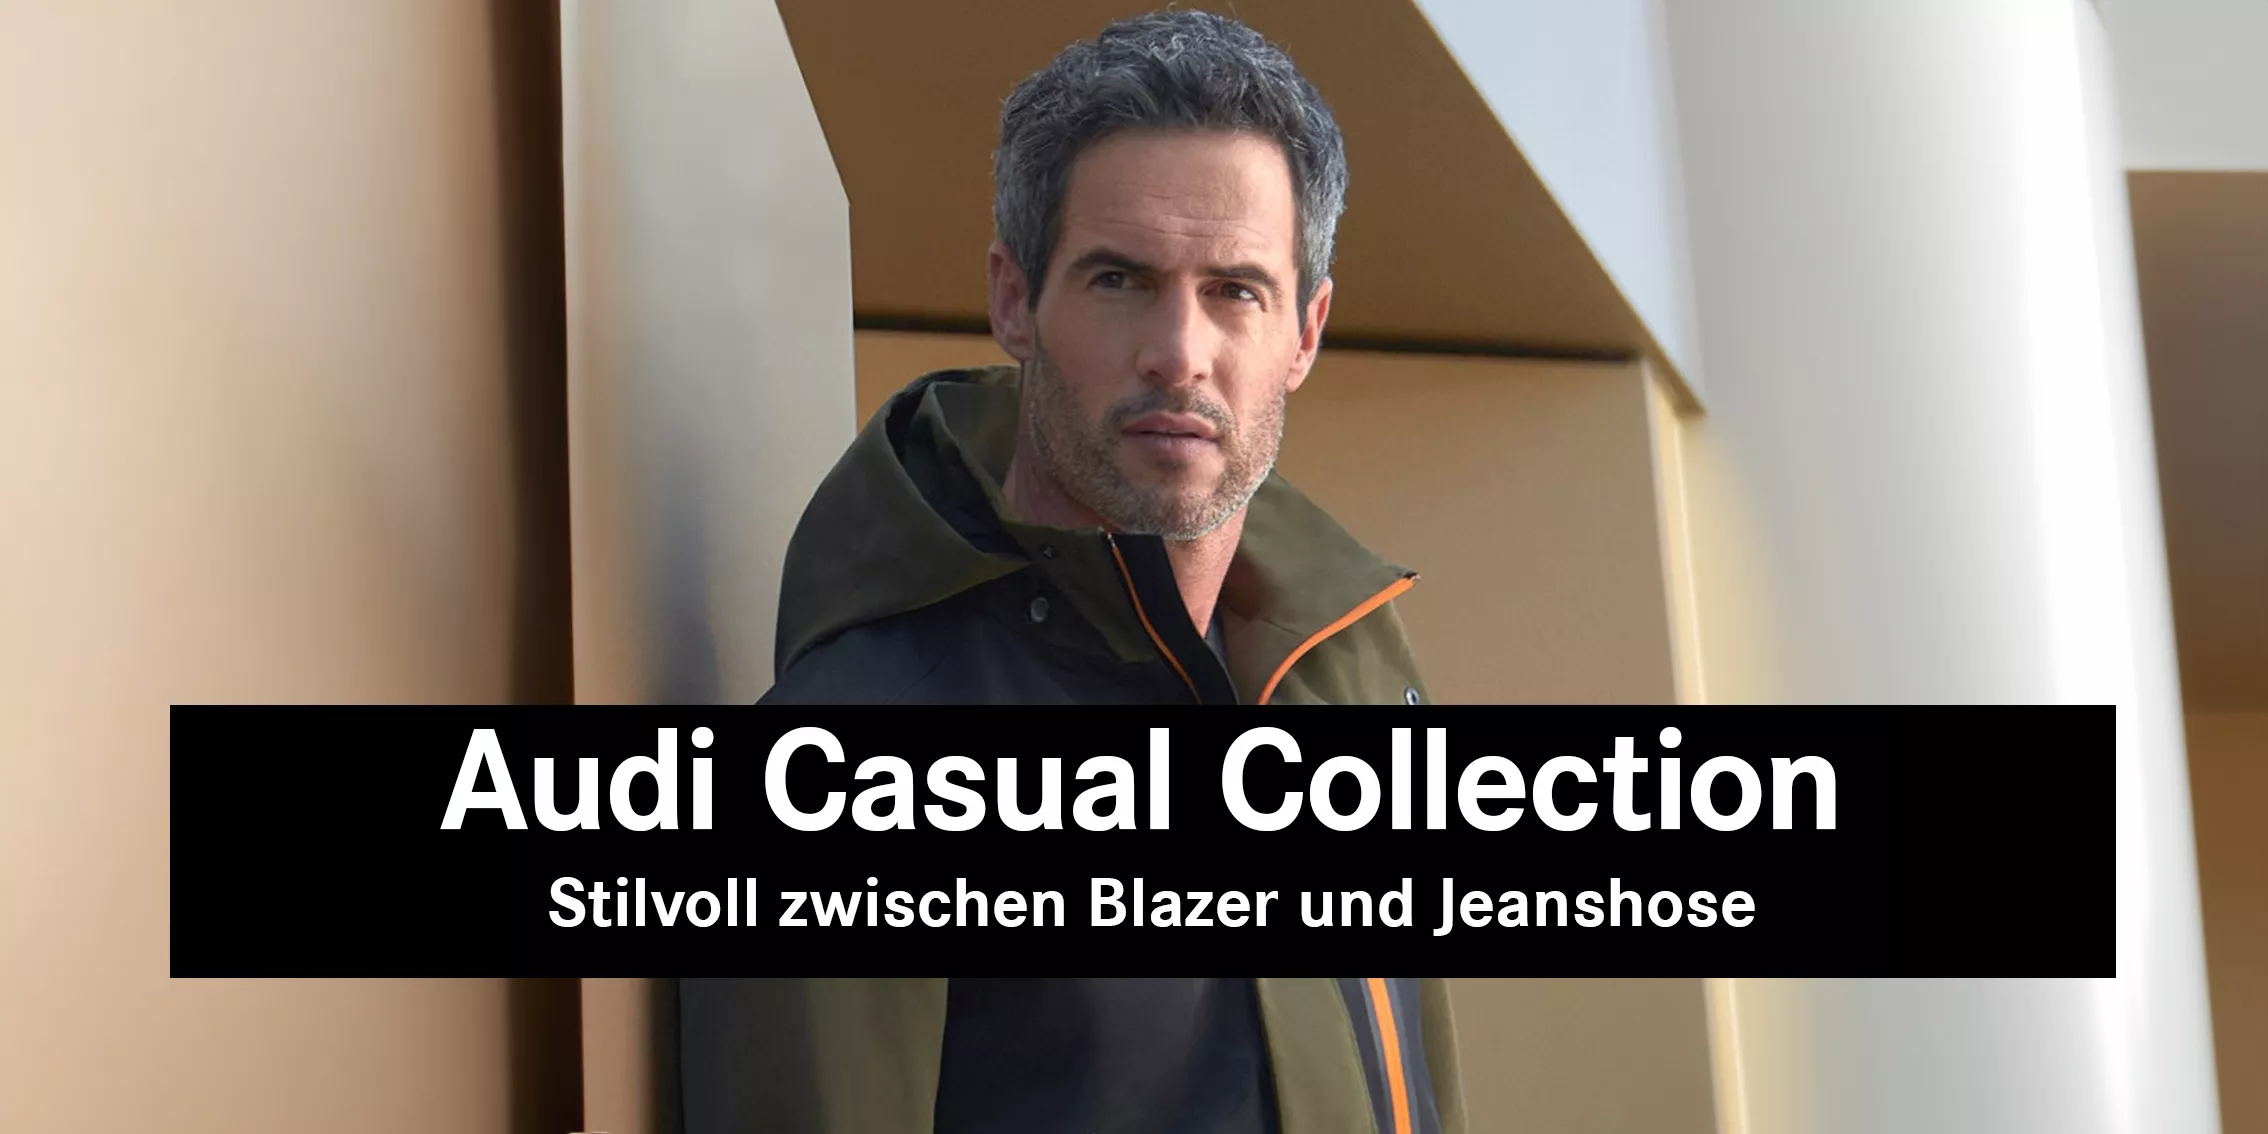 Audi casual collection teaser